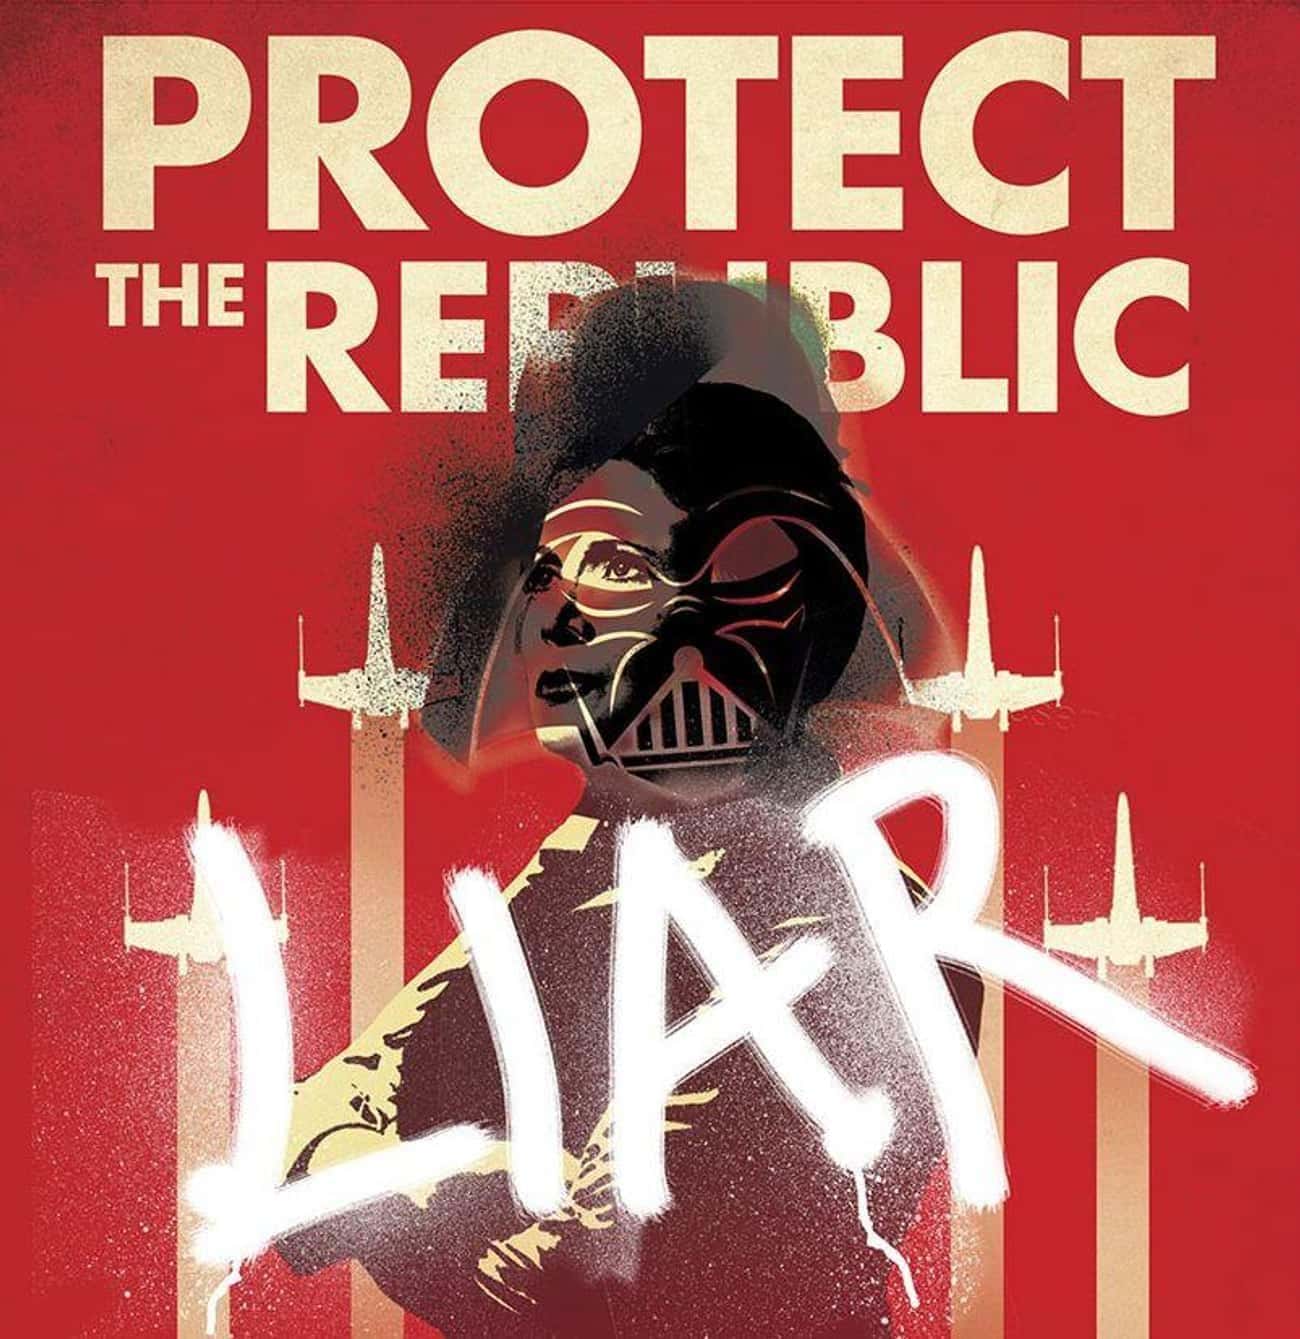 Leia Became A Political Pariah When The New Republic Found Out About Her Relation To Vader